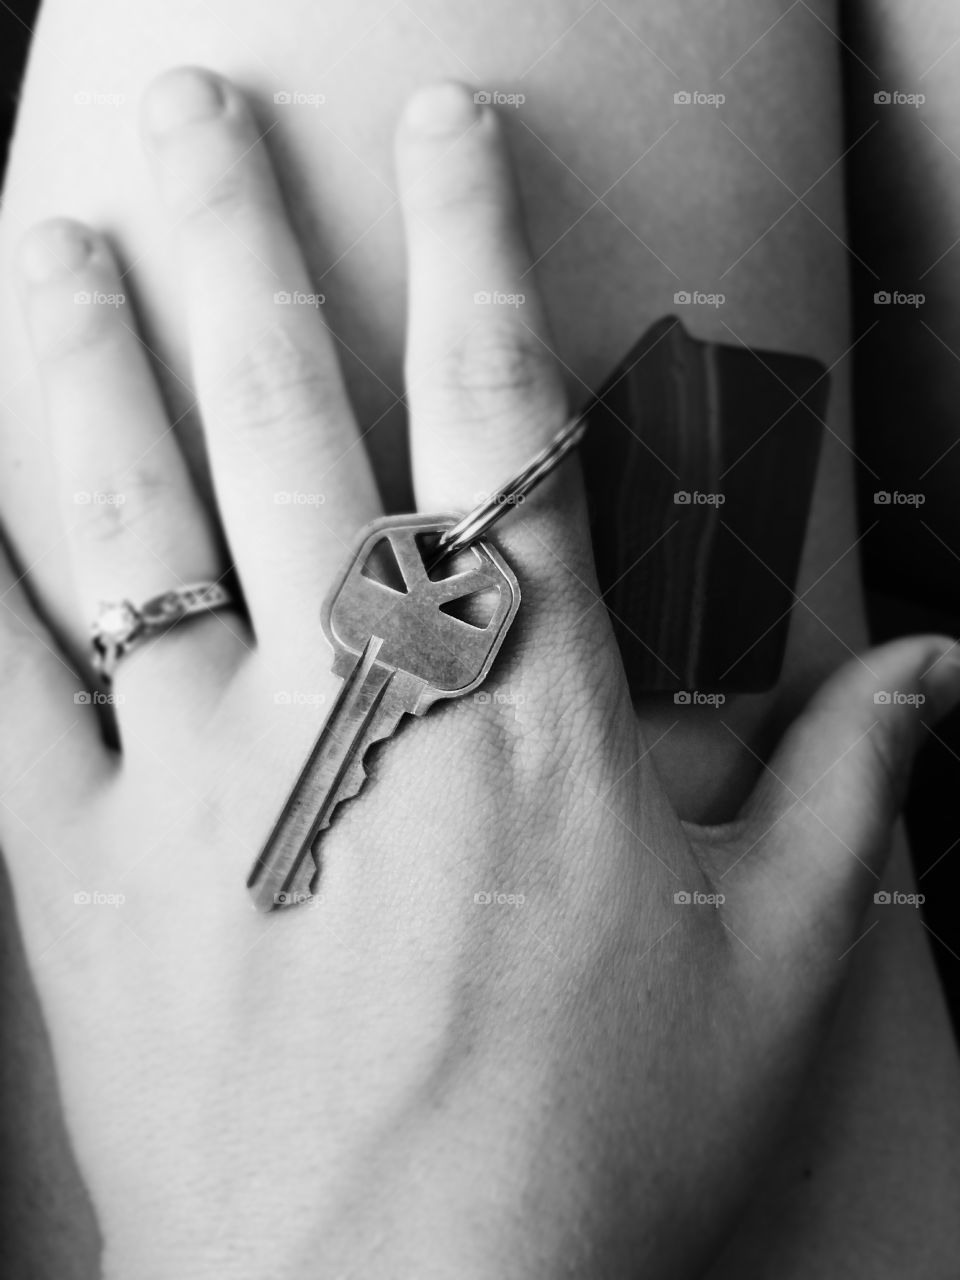 Keys to the first apartment together after engagement! Definitely a moment to remember.